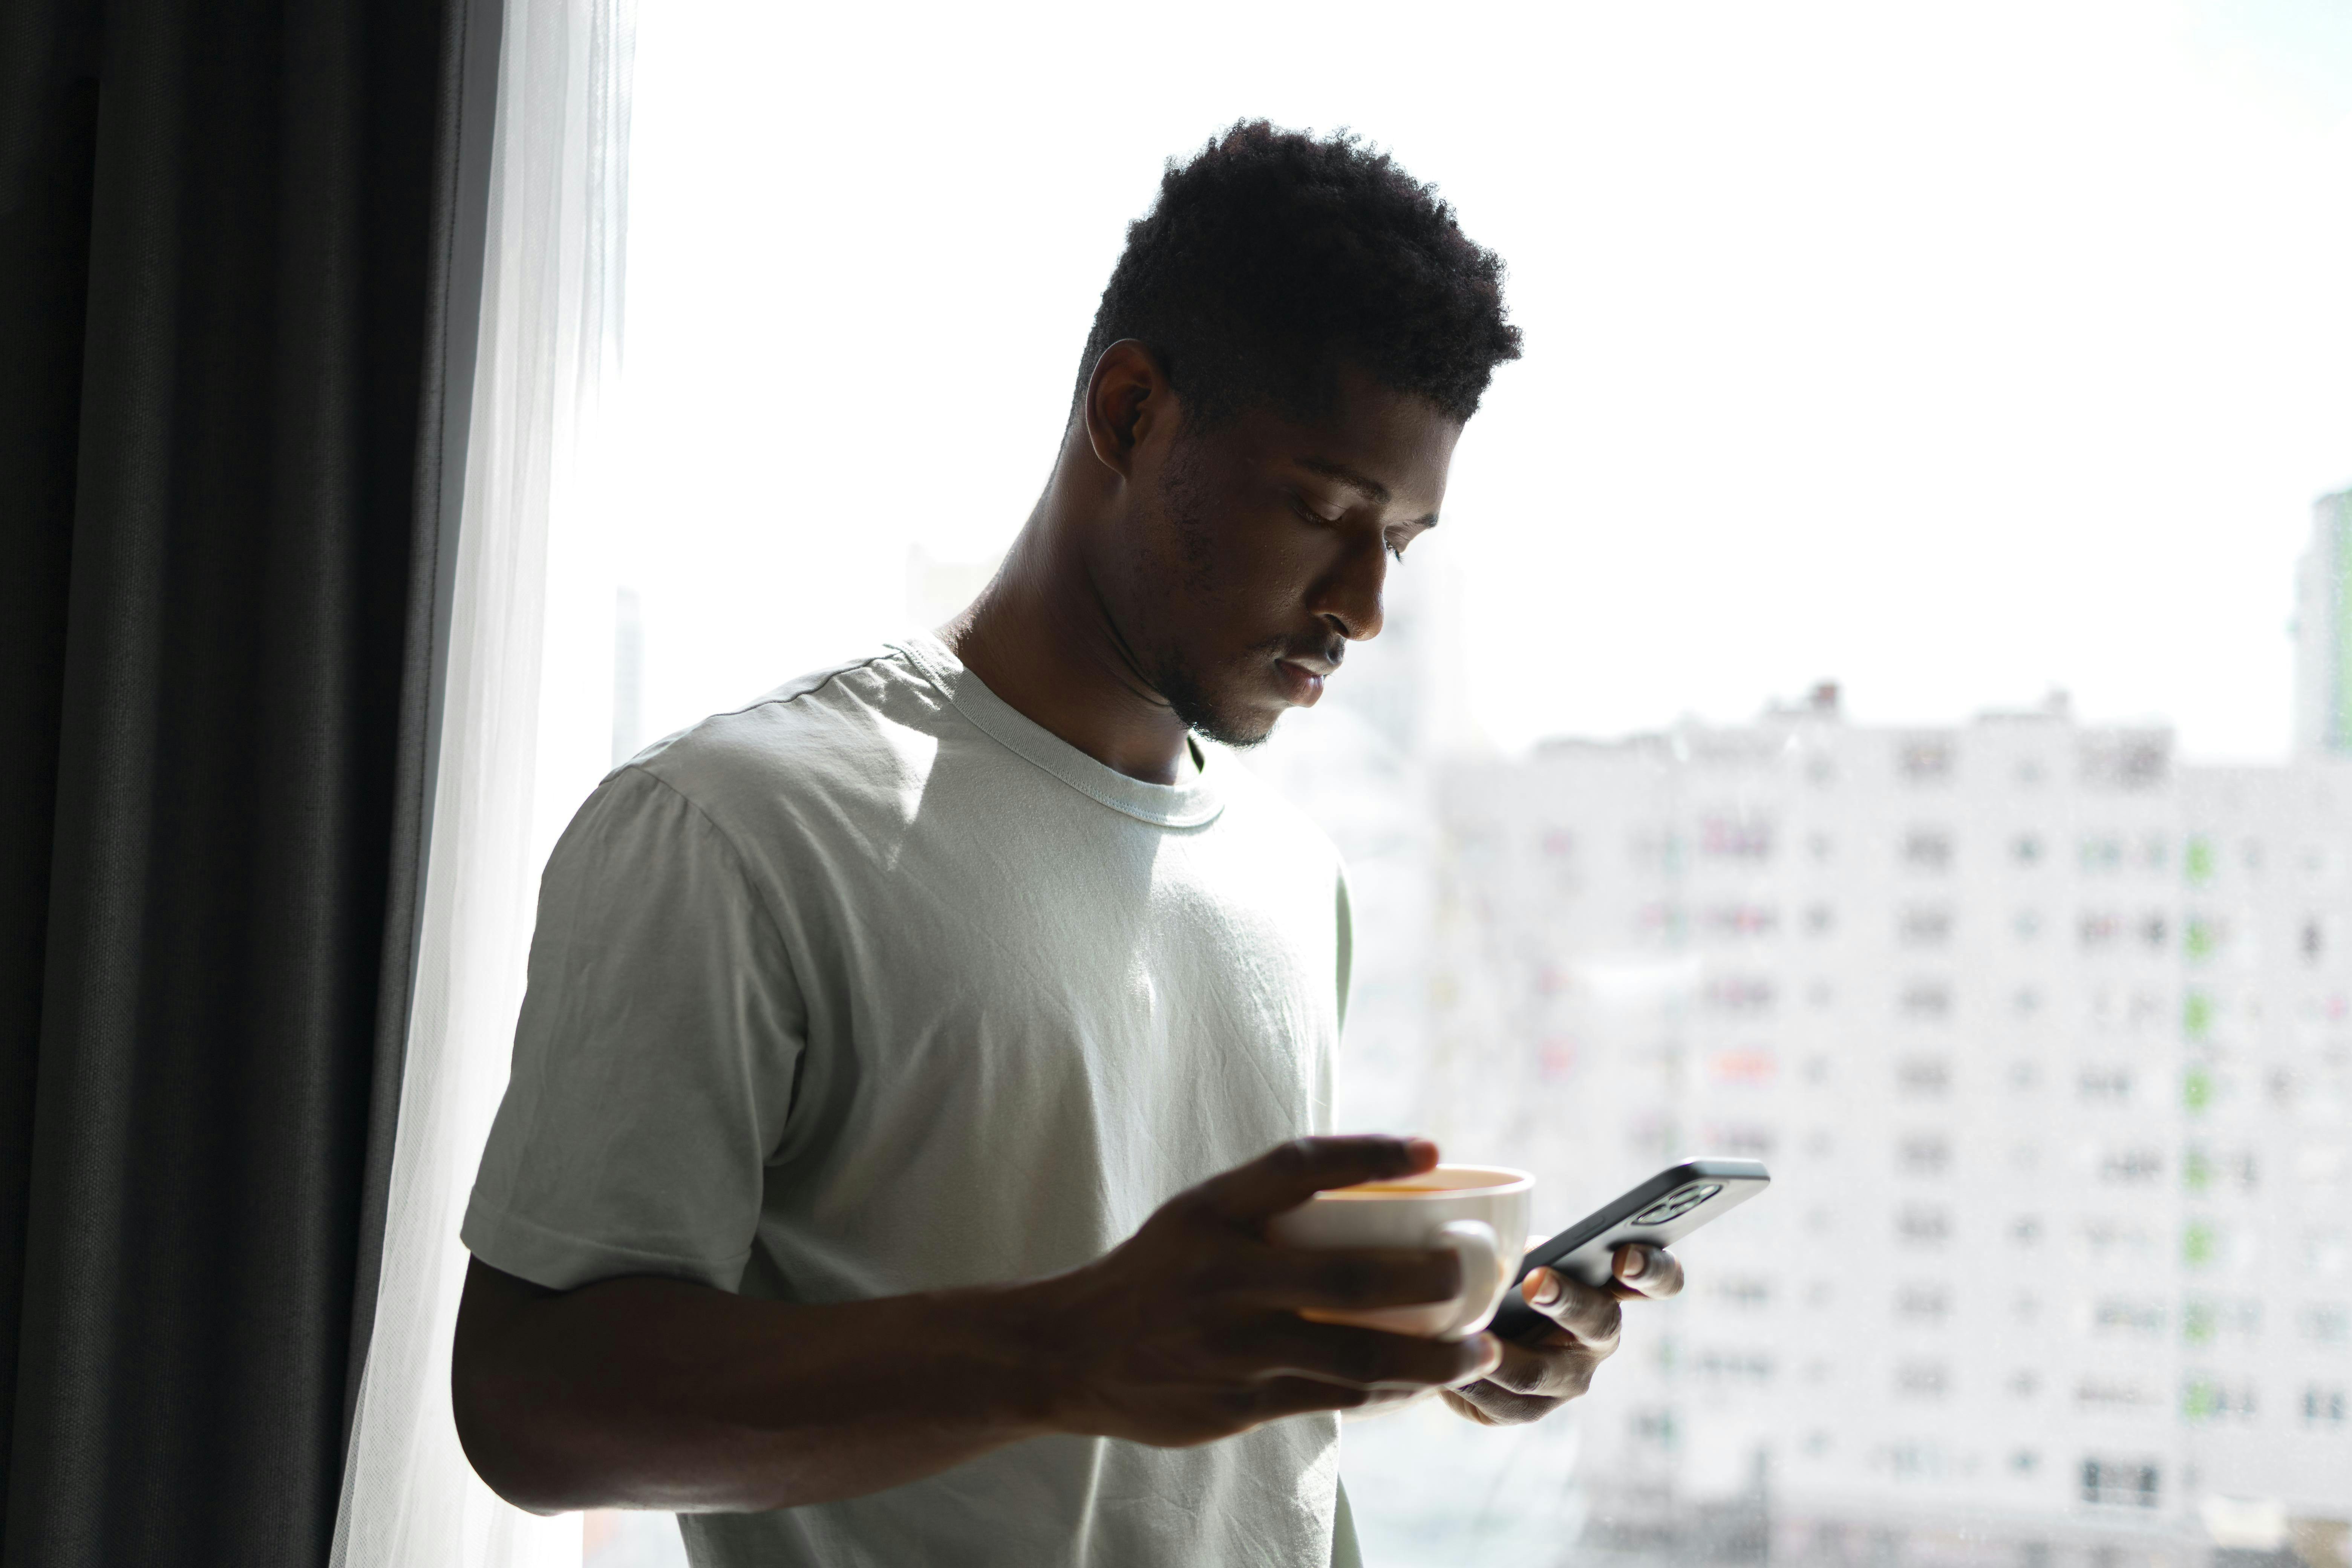 Black man uses phone in room while holding cup and looking focused and involved in task